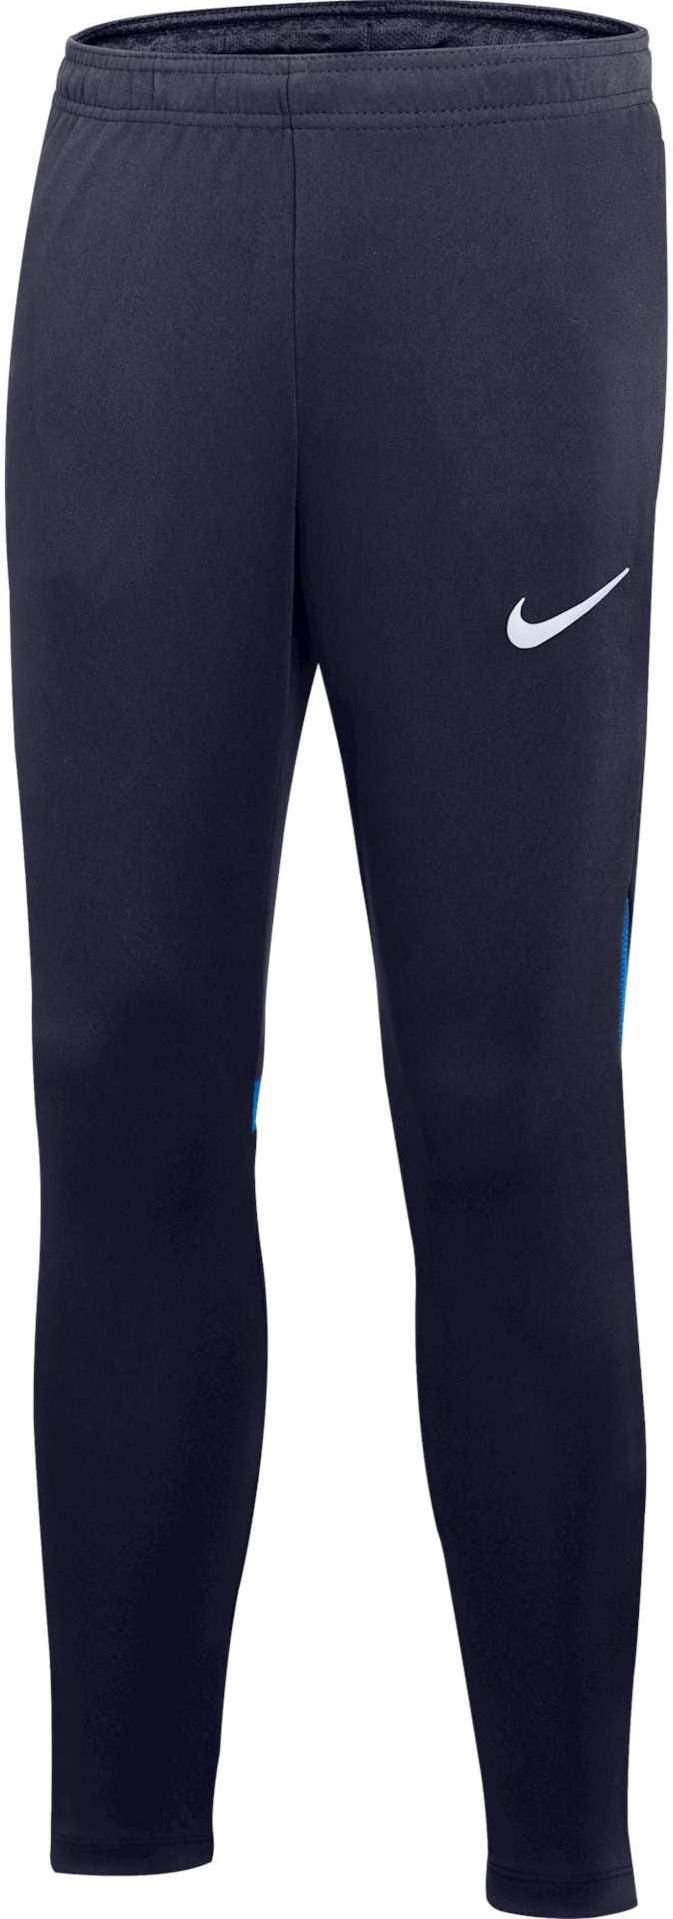 Calças whie Nike Academy Pro Pant Youth